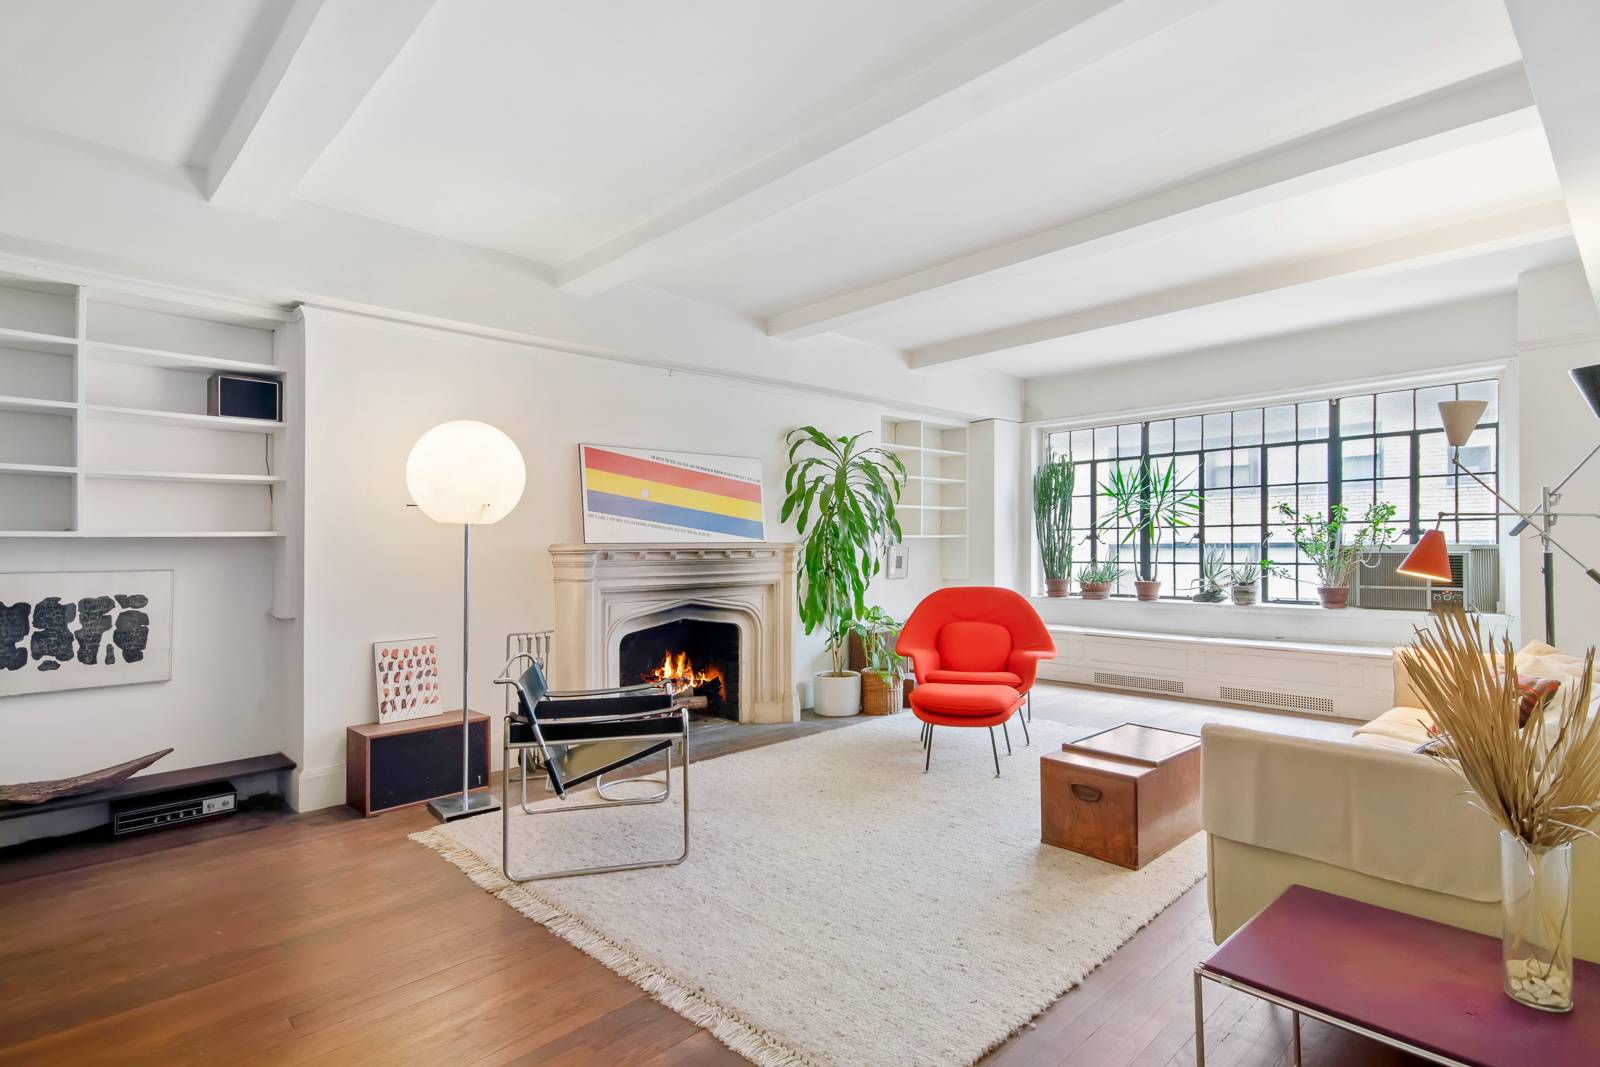 Bring your architect ! A rare opportunity exists to acquire a large prewar 2 bedroom 1.